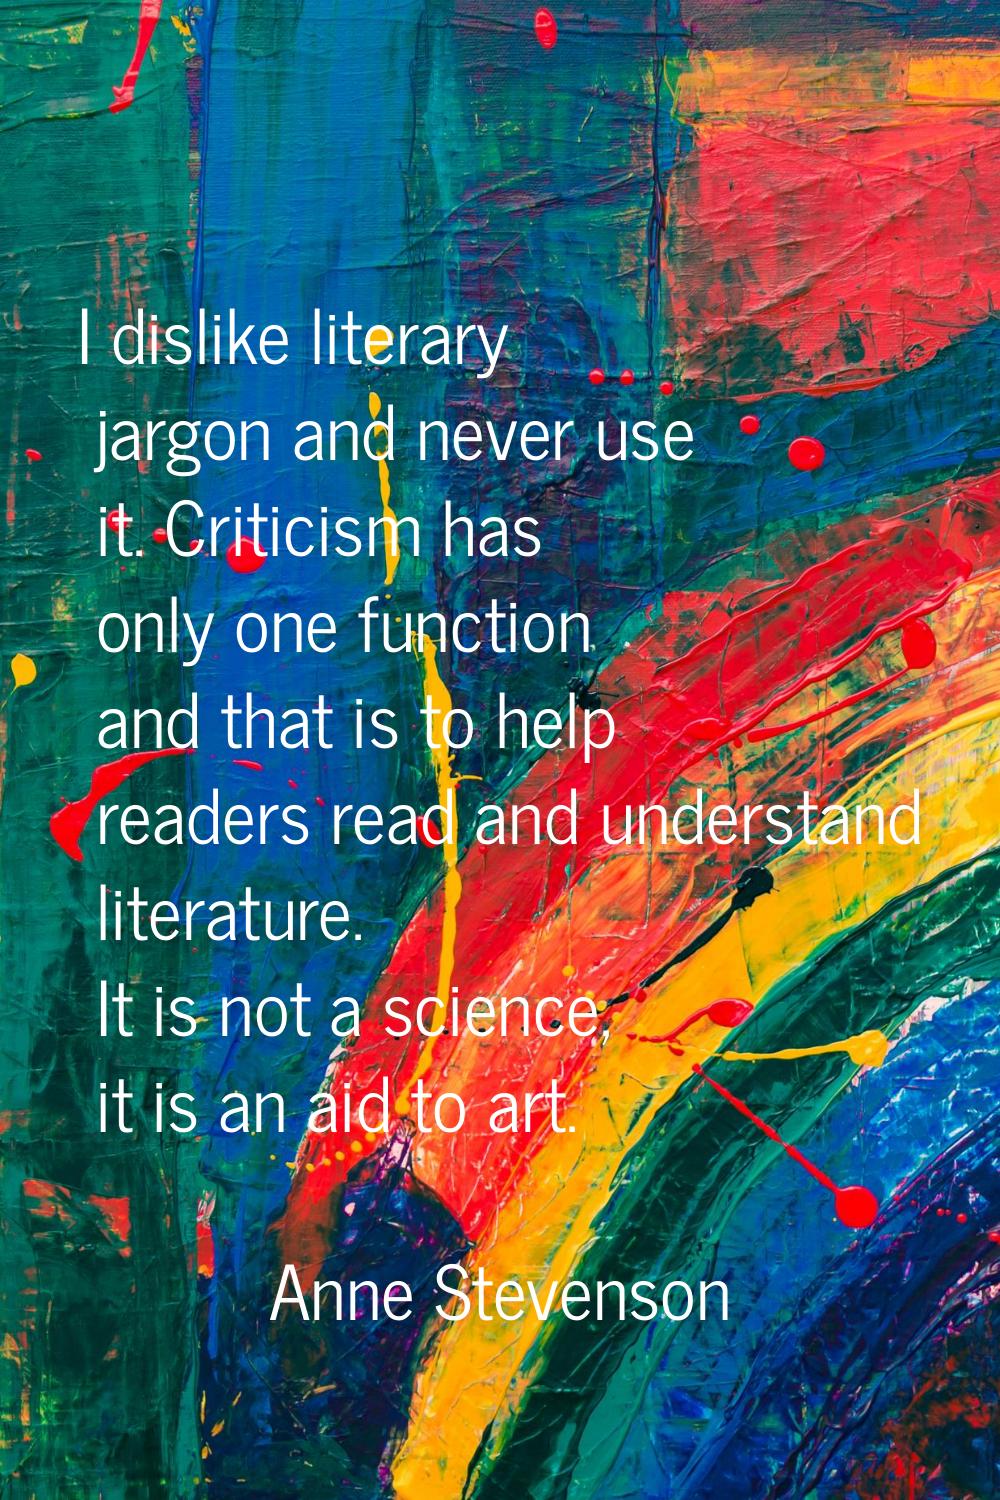 I dislike literary jargon and never use it. Criticism has only one function and that is to help rea